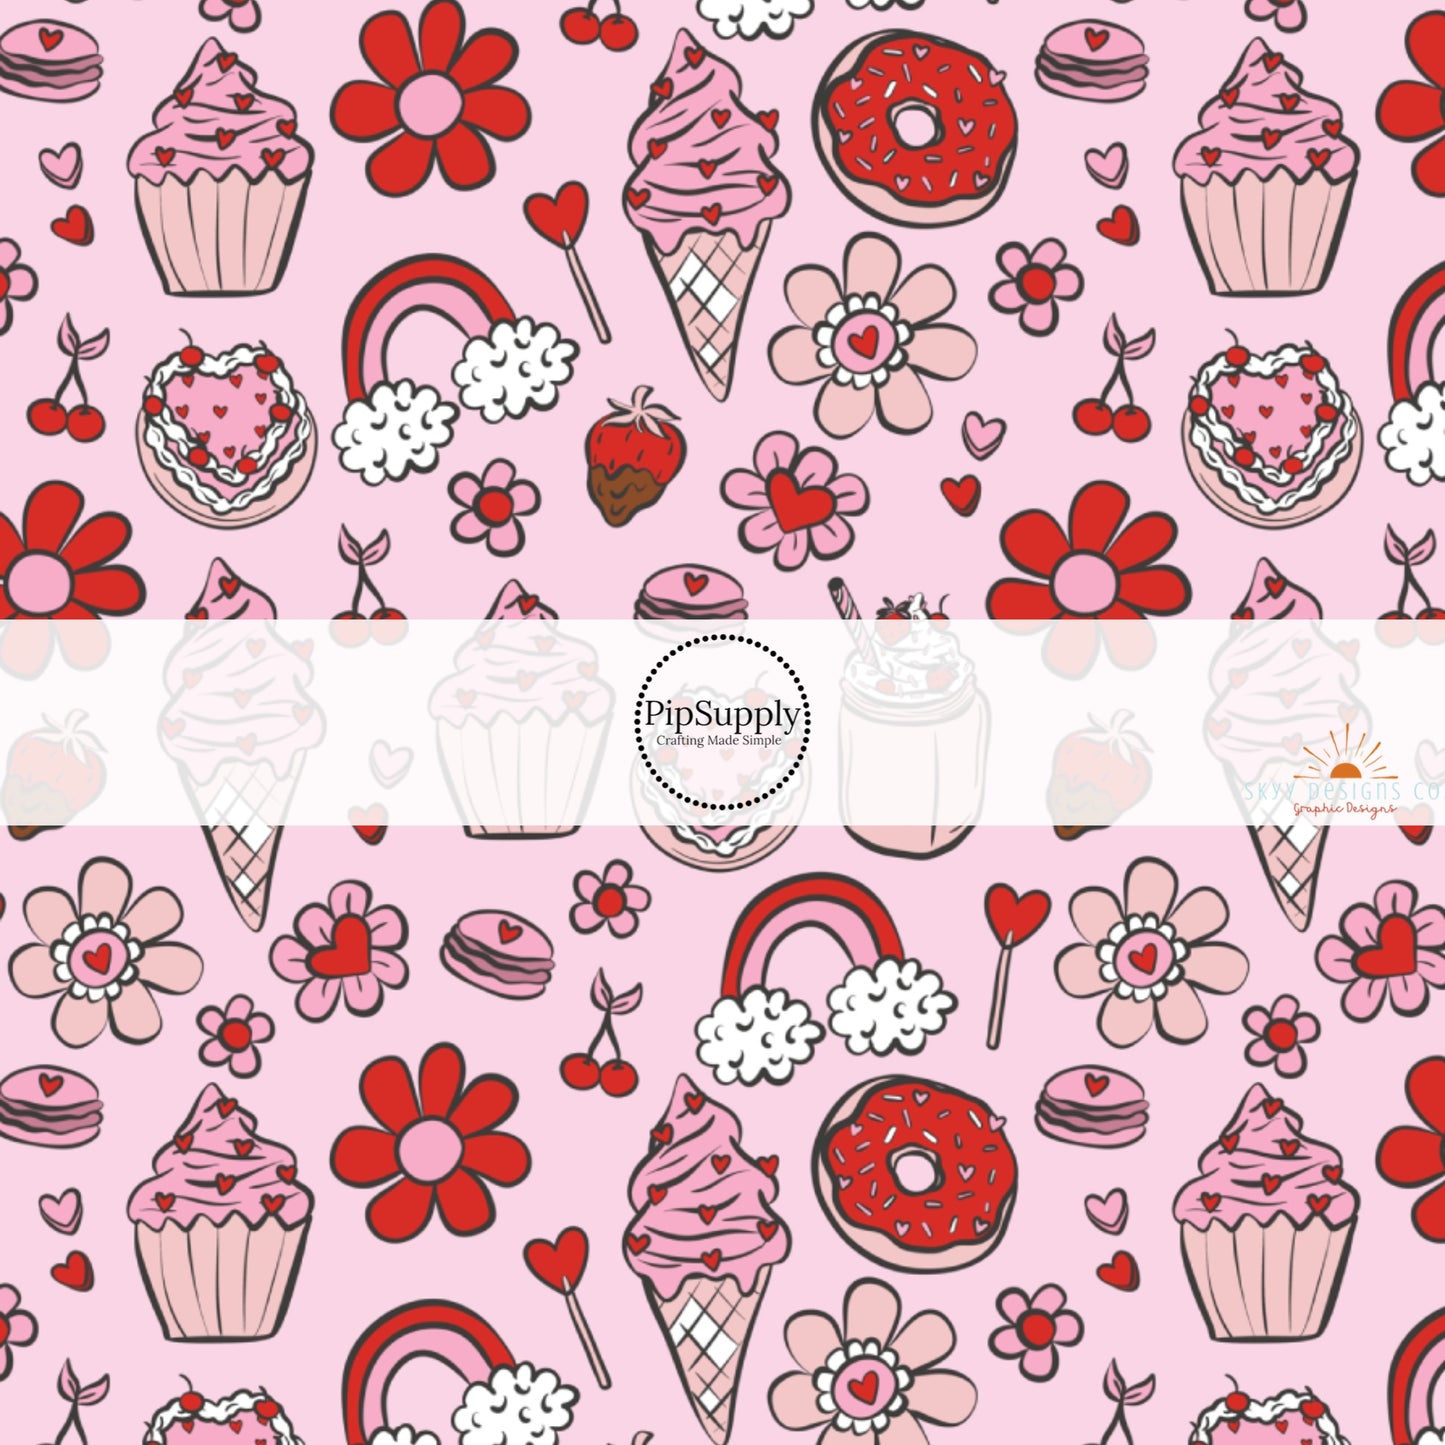 Strawberries, Daisies, Rainbows, and Cupcakes on Light Pink Fabric by the Yard.